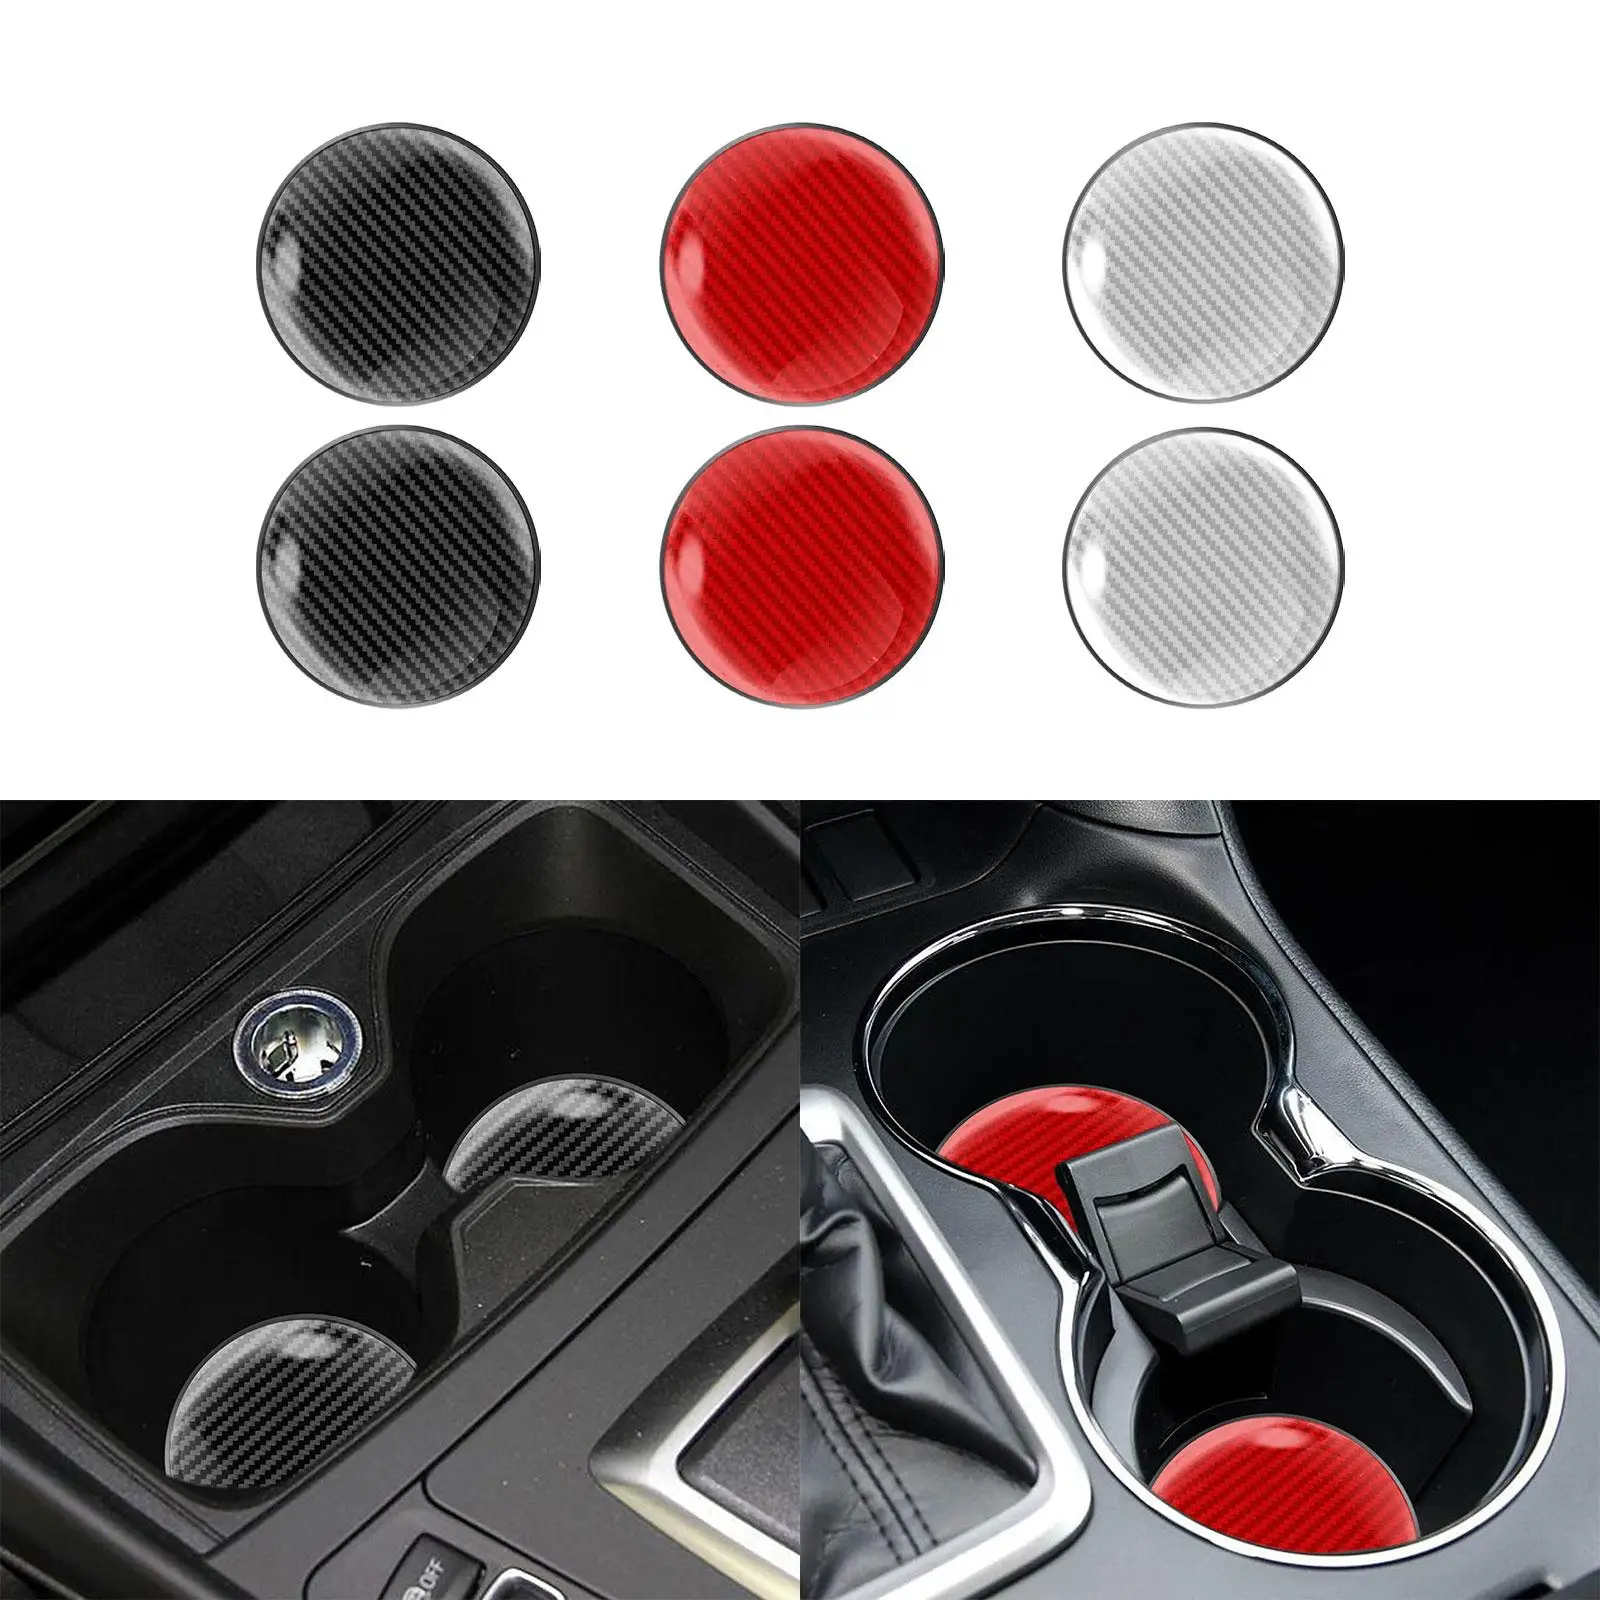 2x Cup Holder Coaster Car Accessory Non Slip Teacup Protector Water Cup Coasters Slot Vehicle Coasters for Outdoor Most Cars